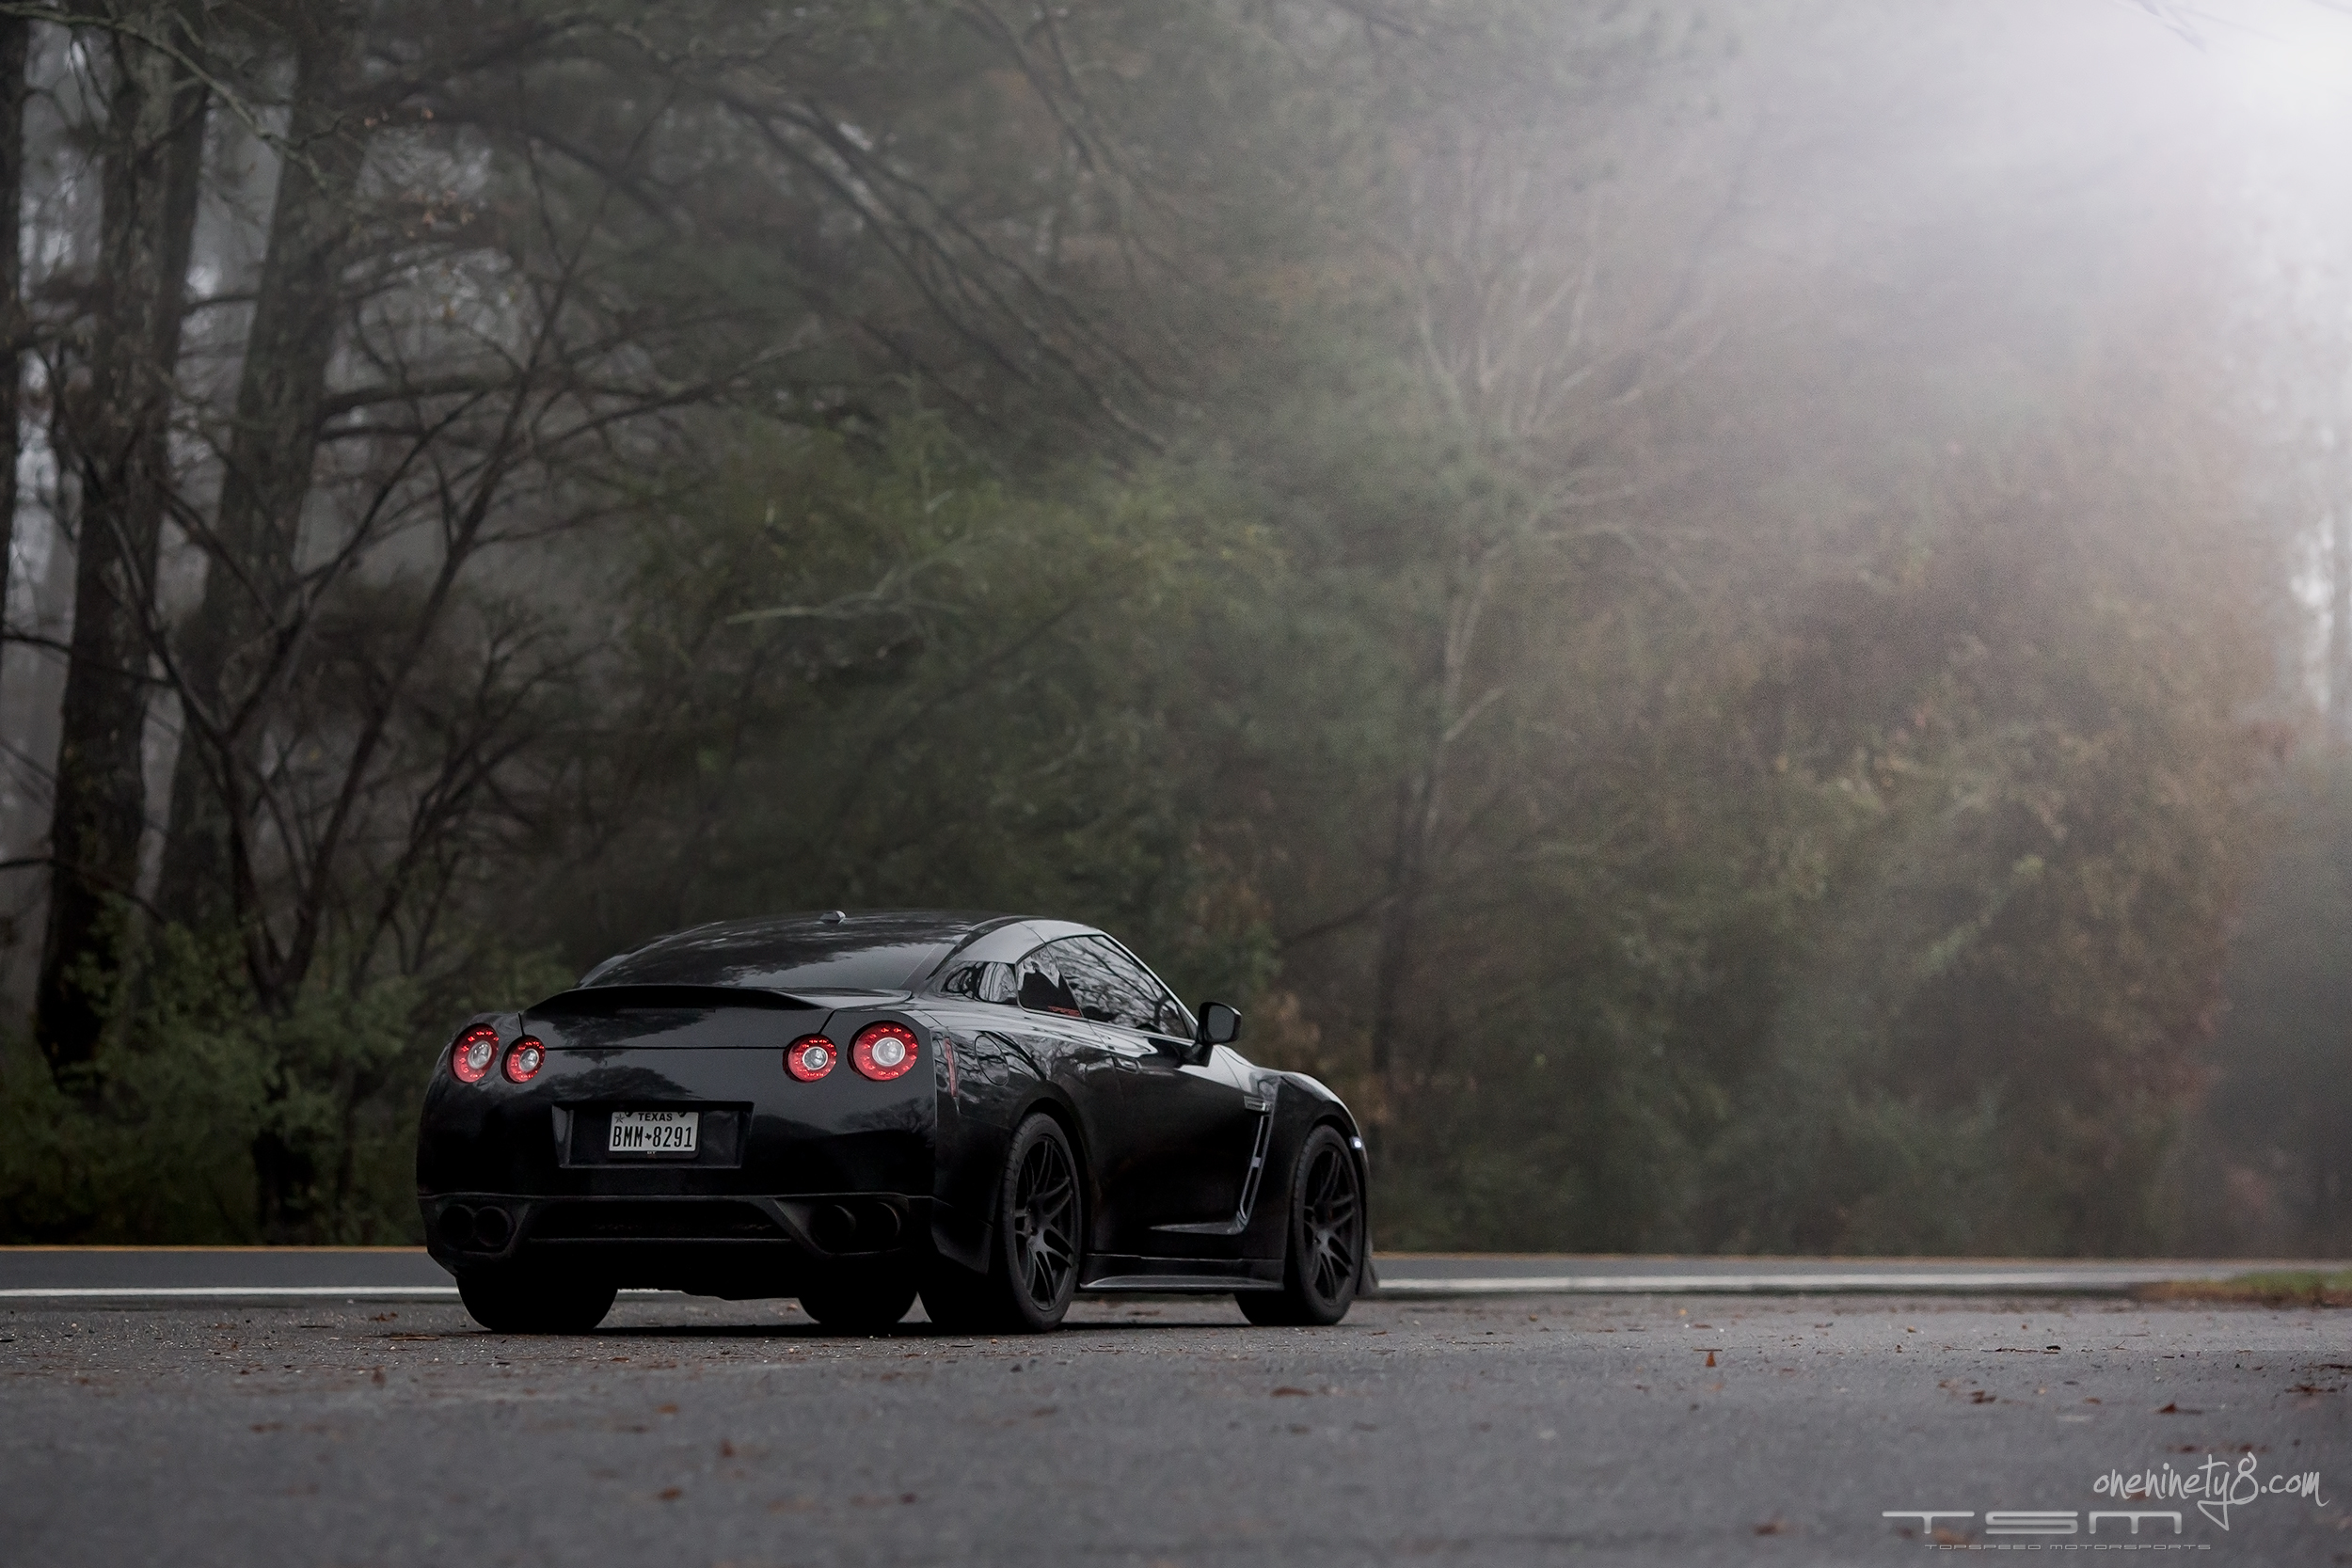 Vehicles Nissan GT-R HD Wallpaper | Background Image